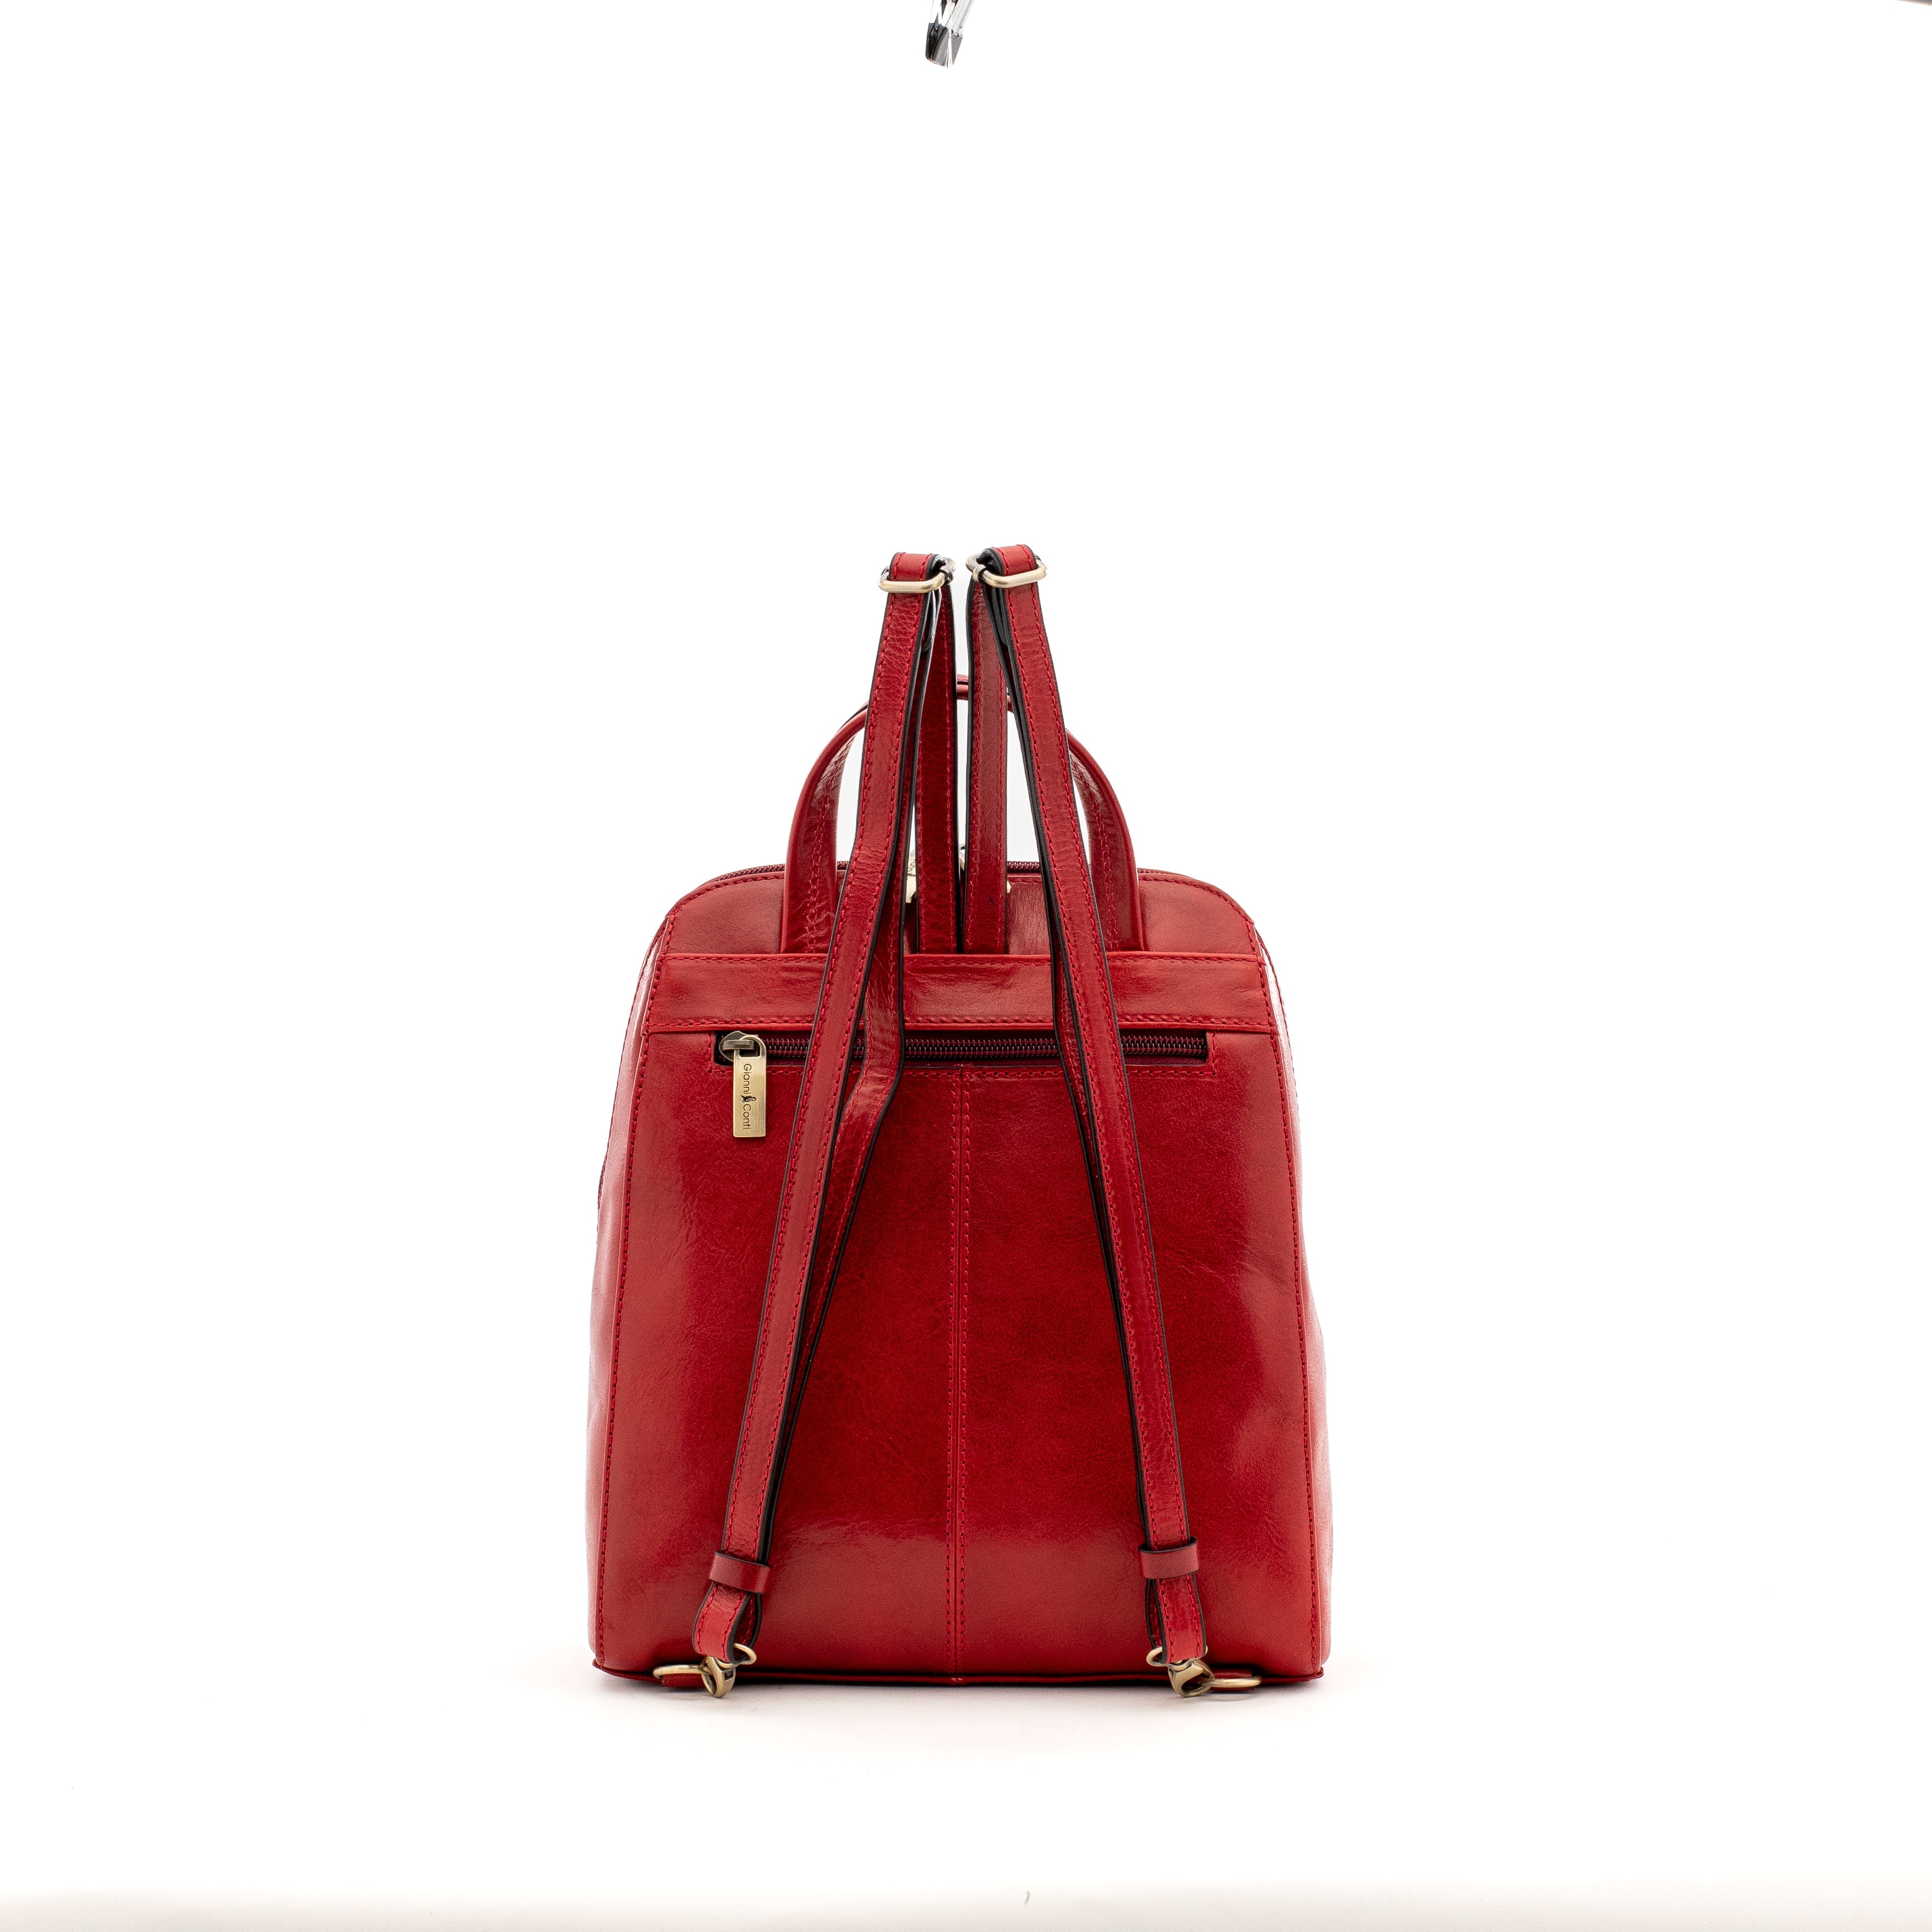 Gianni Conti Myrtle Leather Backpack